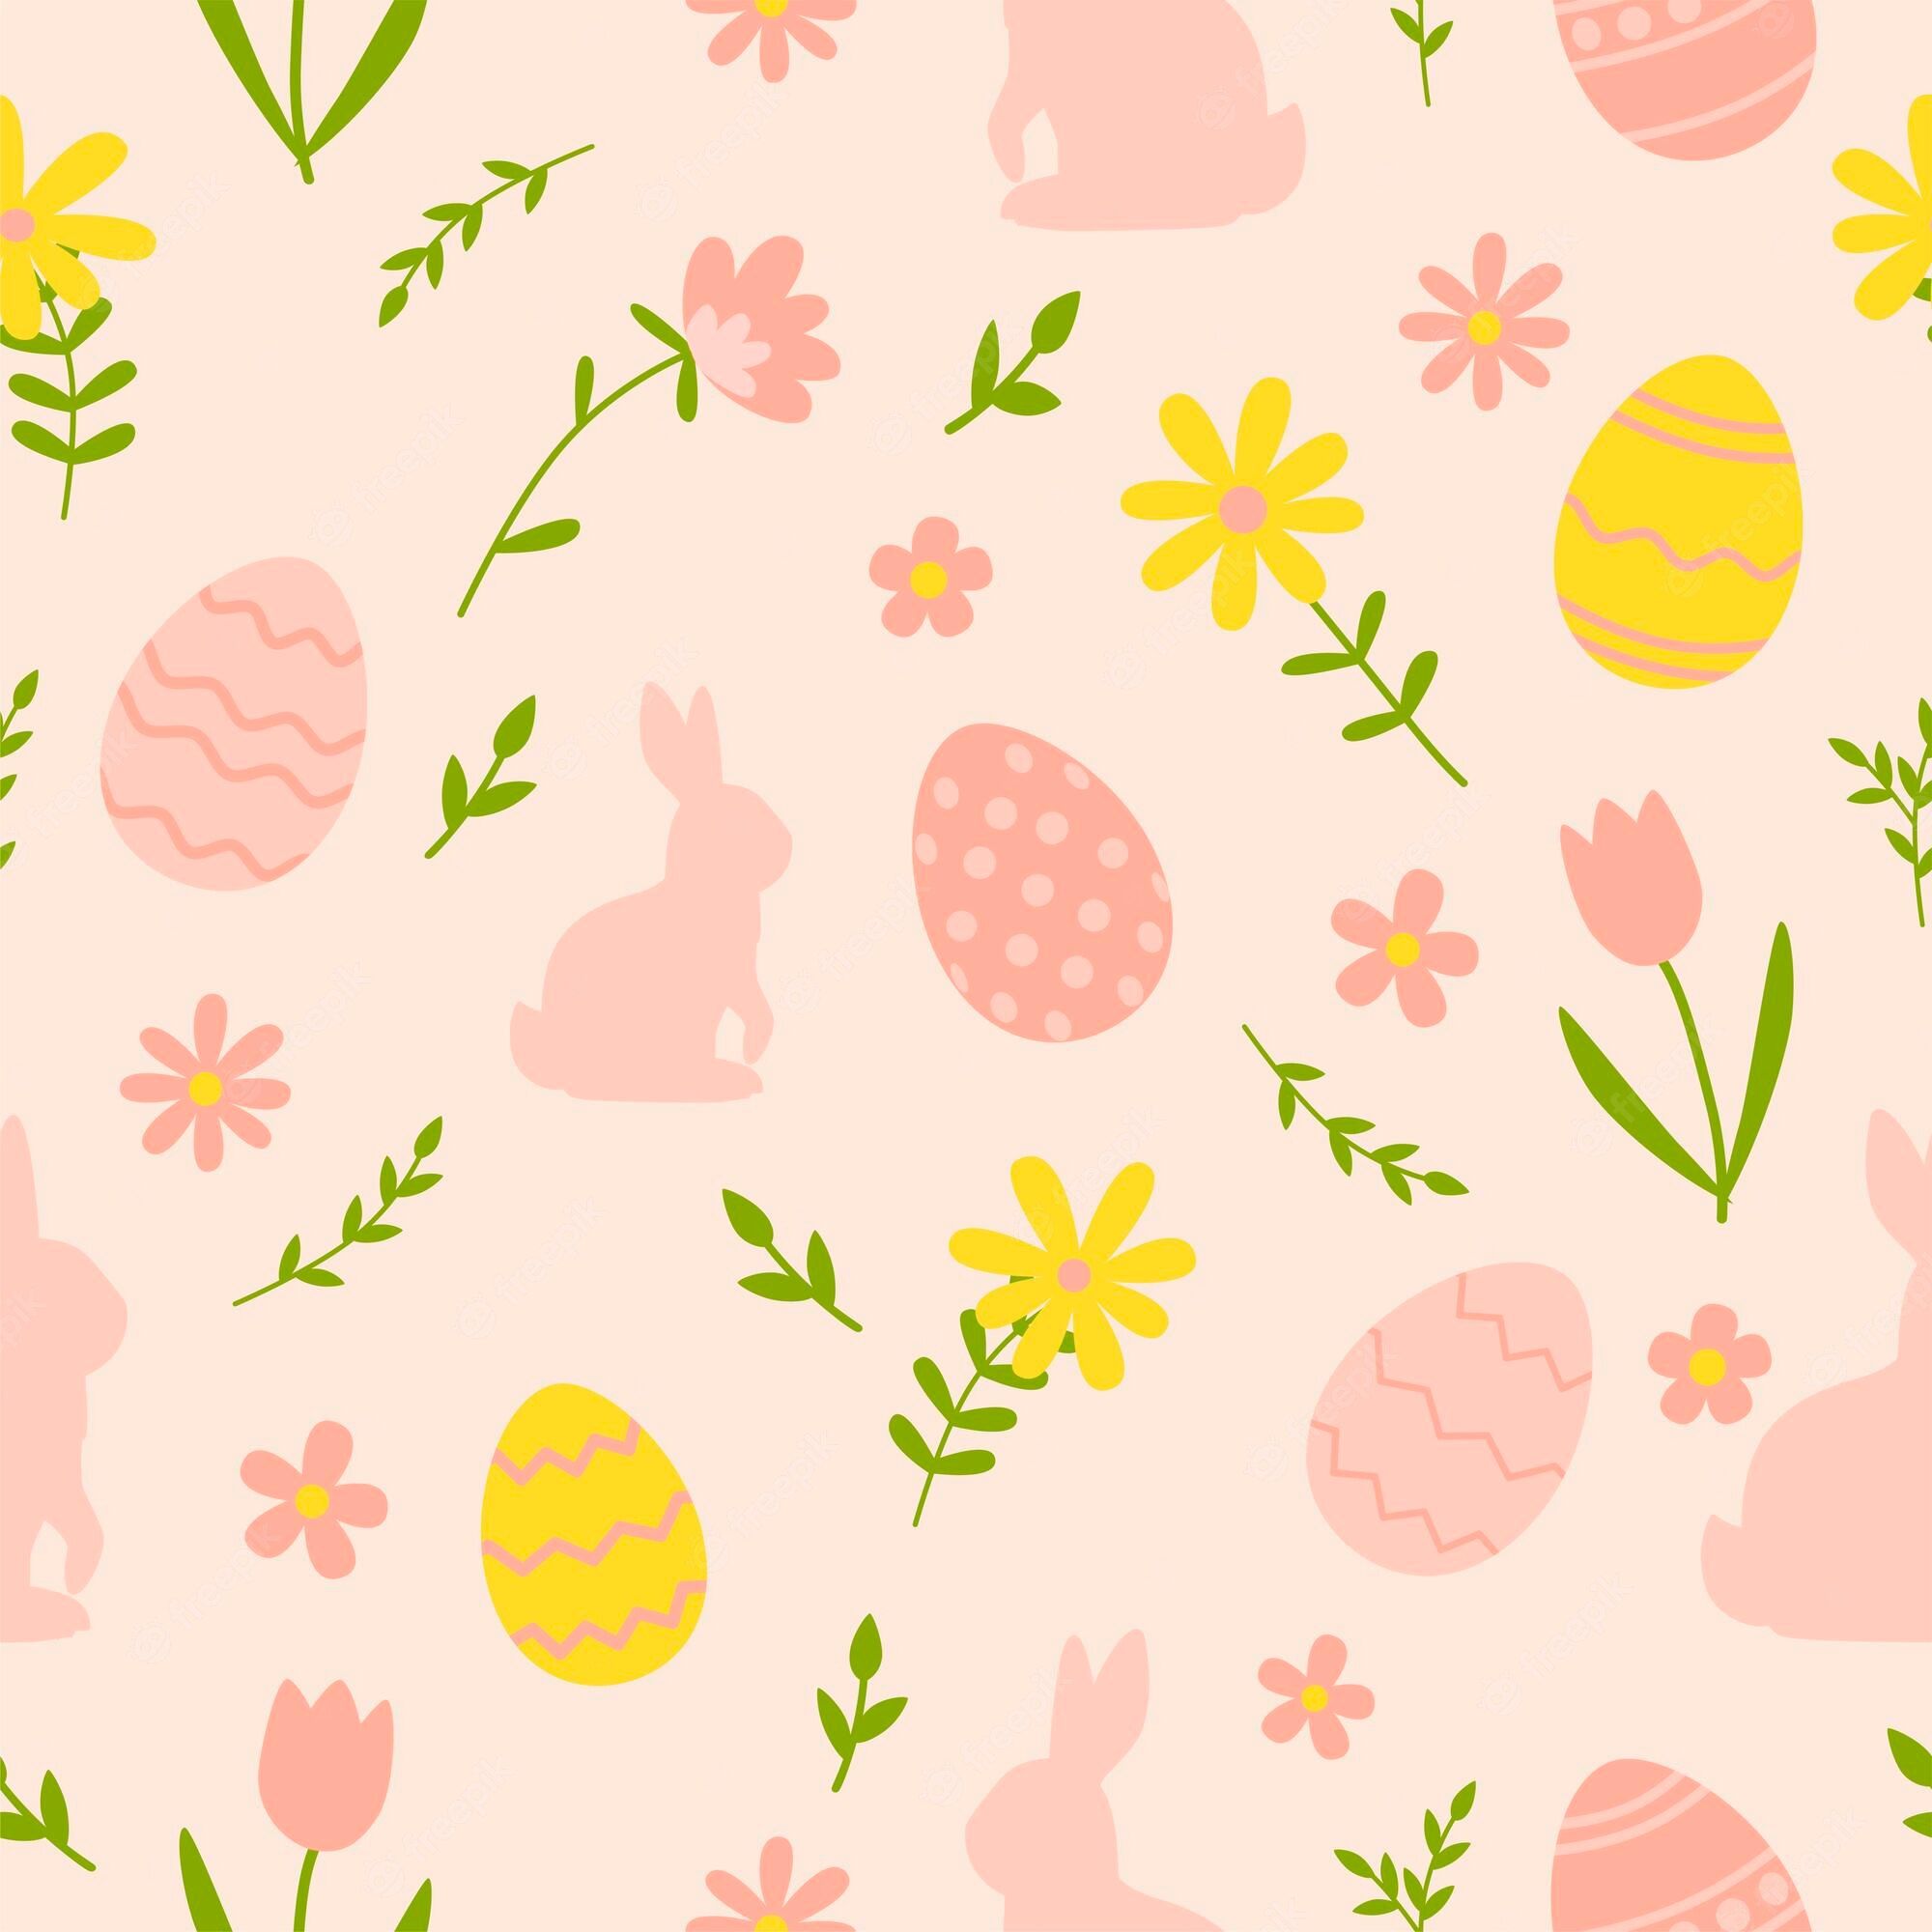 A pattern of easter eggs, bunnies and flowers - Easter